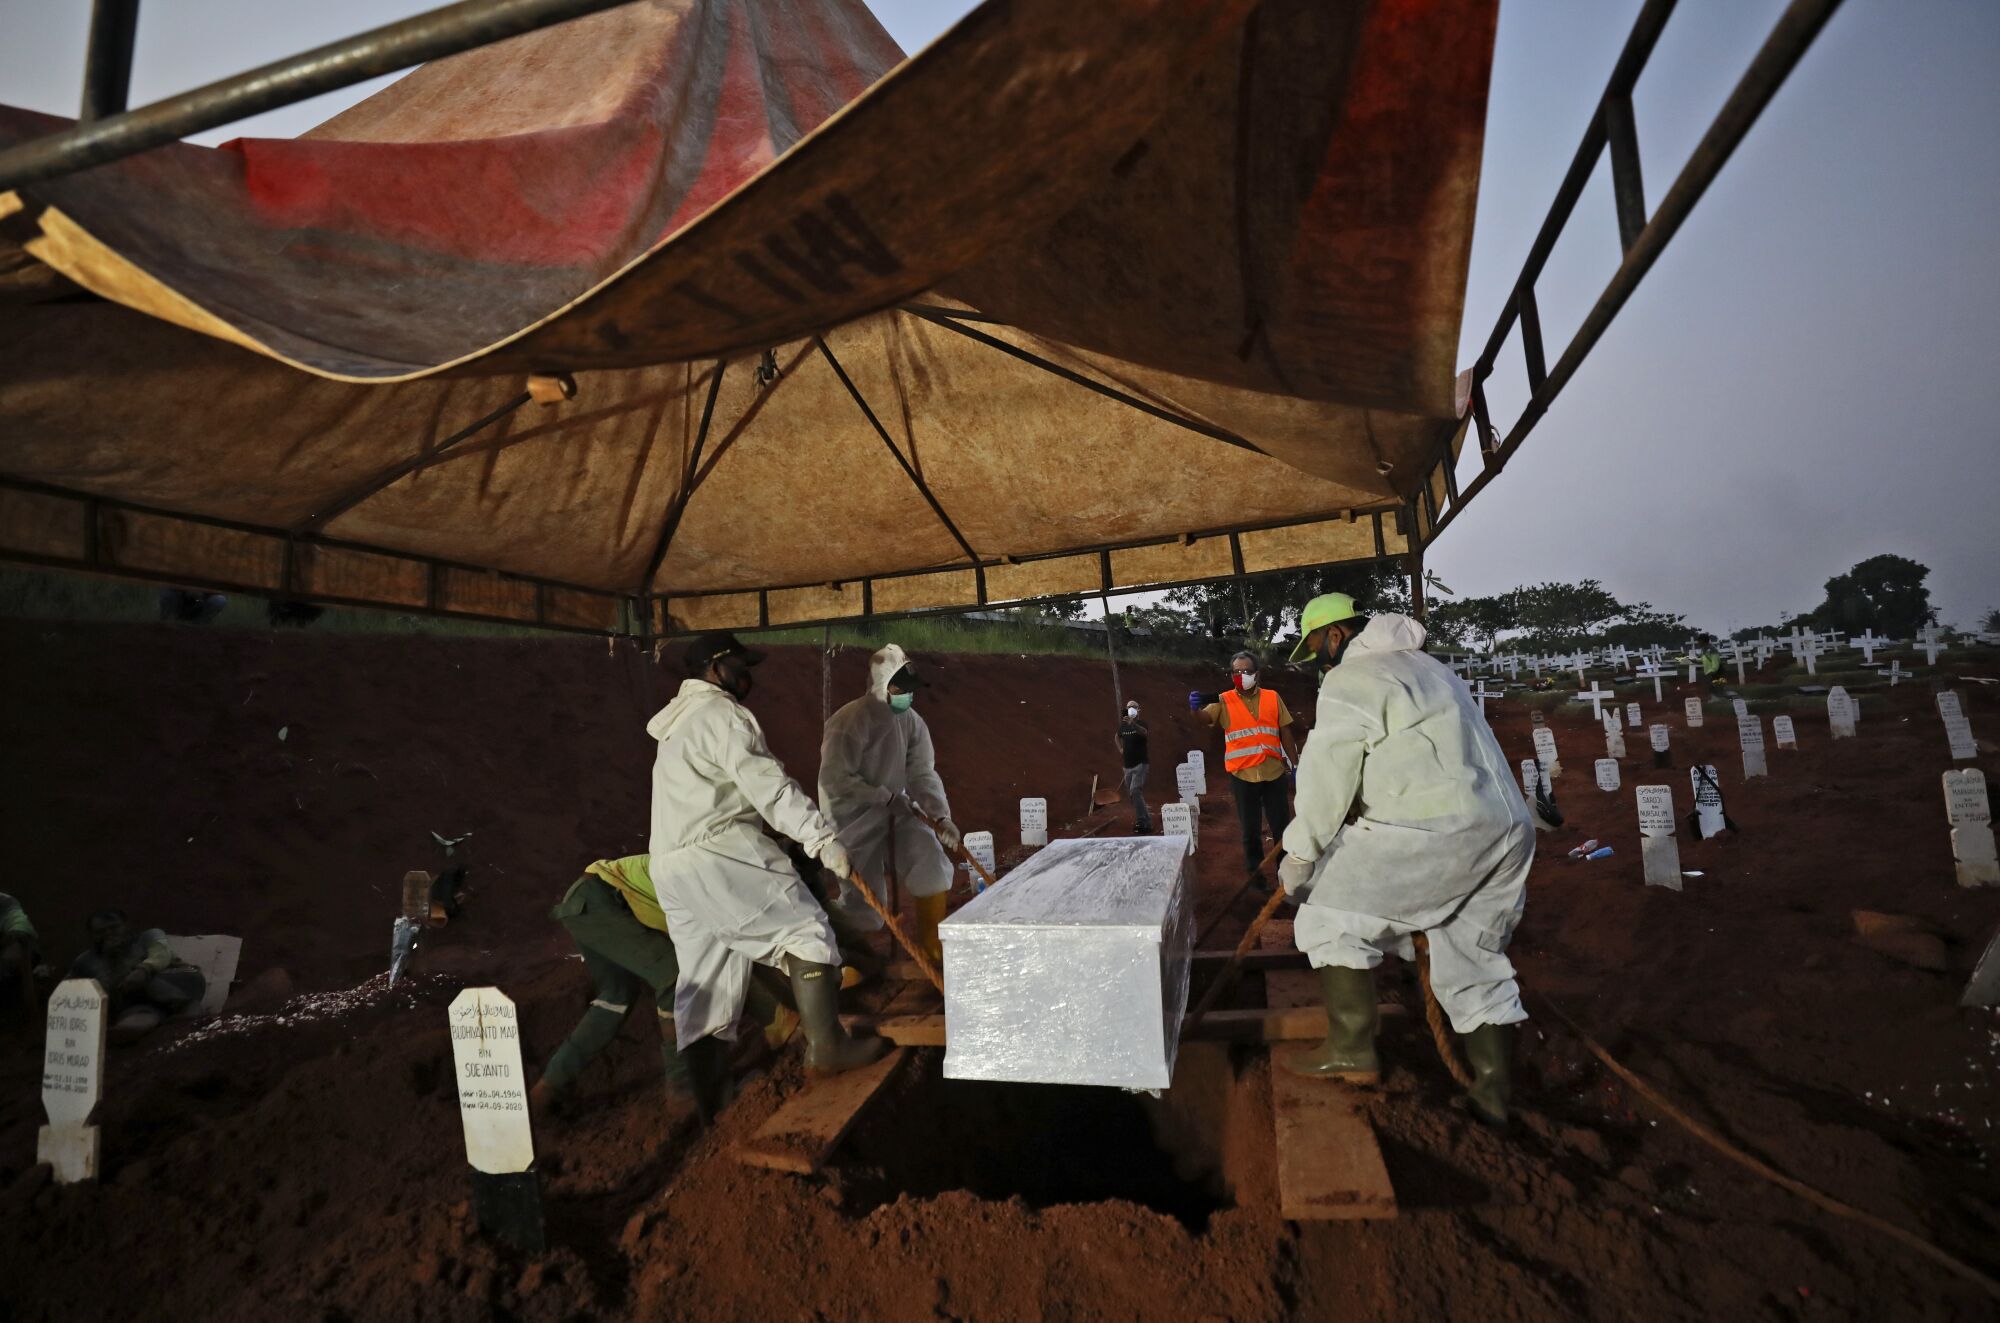 Workers lower a coffin containing the body of a suspected COVID-19 victim into a grave at Pondok Ranggon cemetery.